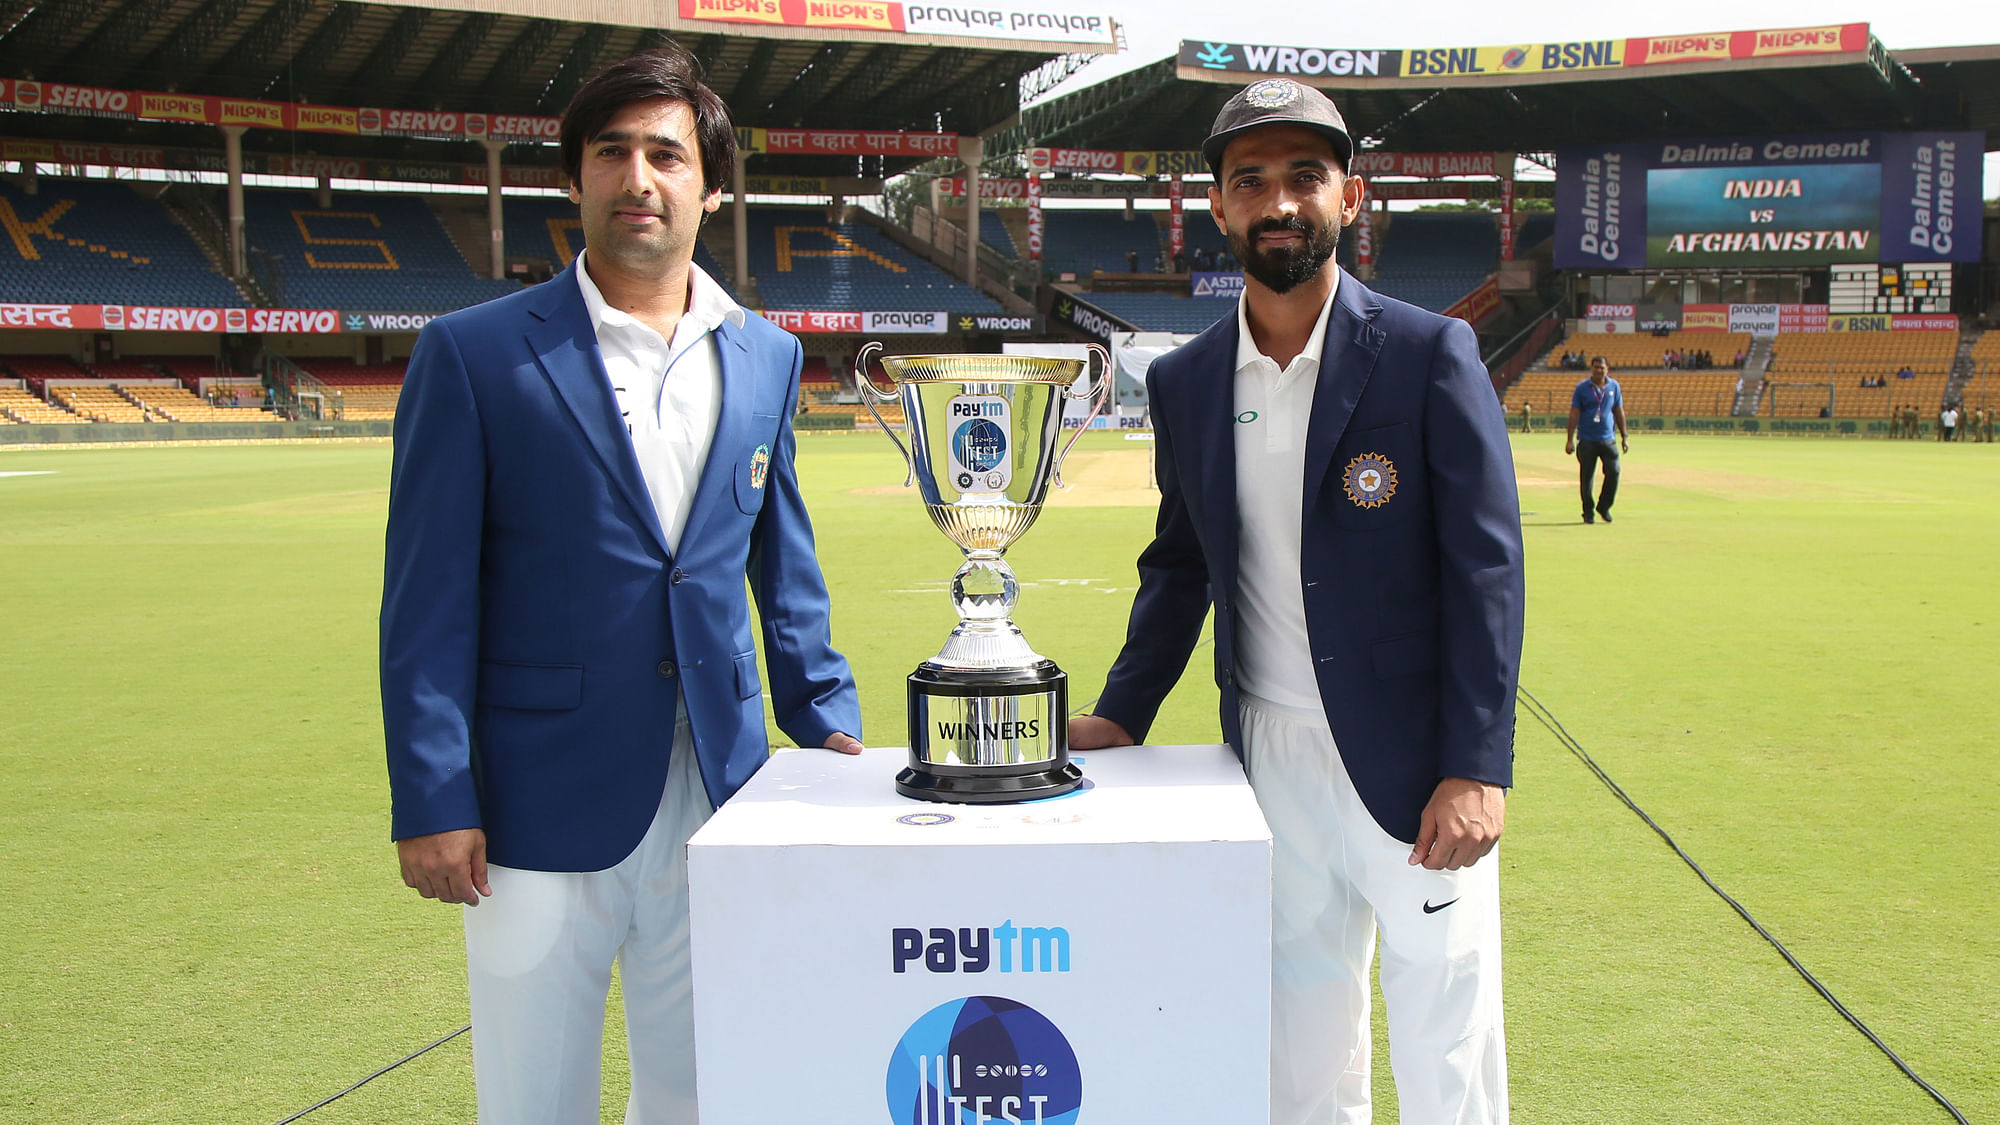 Indian captain Ajinkya Rahane and Afghanistan captain Asghar Stanikzai during day one of the Test match between India and Afghanistan held at the M Chinnaswamy Stadium in Bengaluru on Thursday,  14 June.